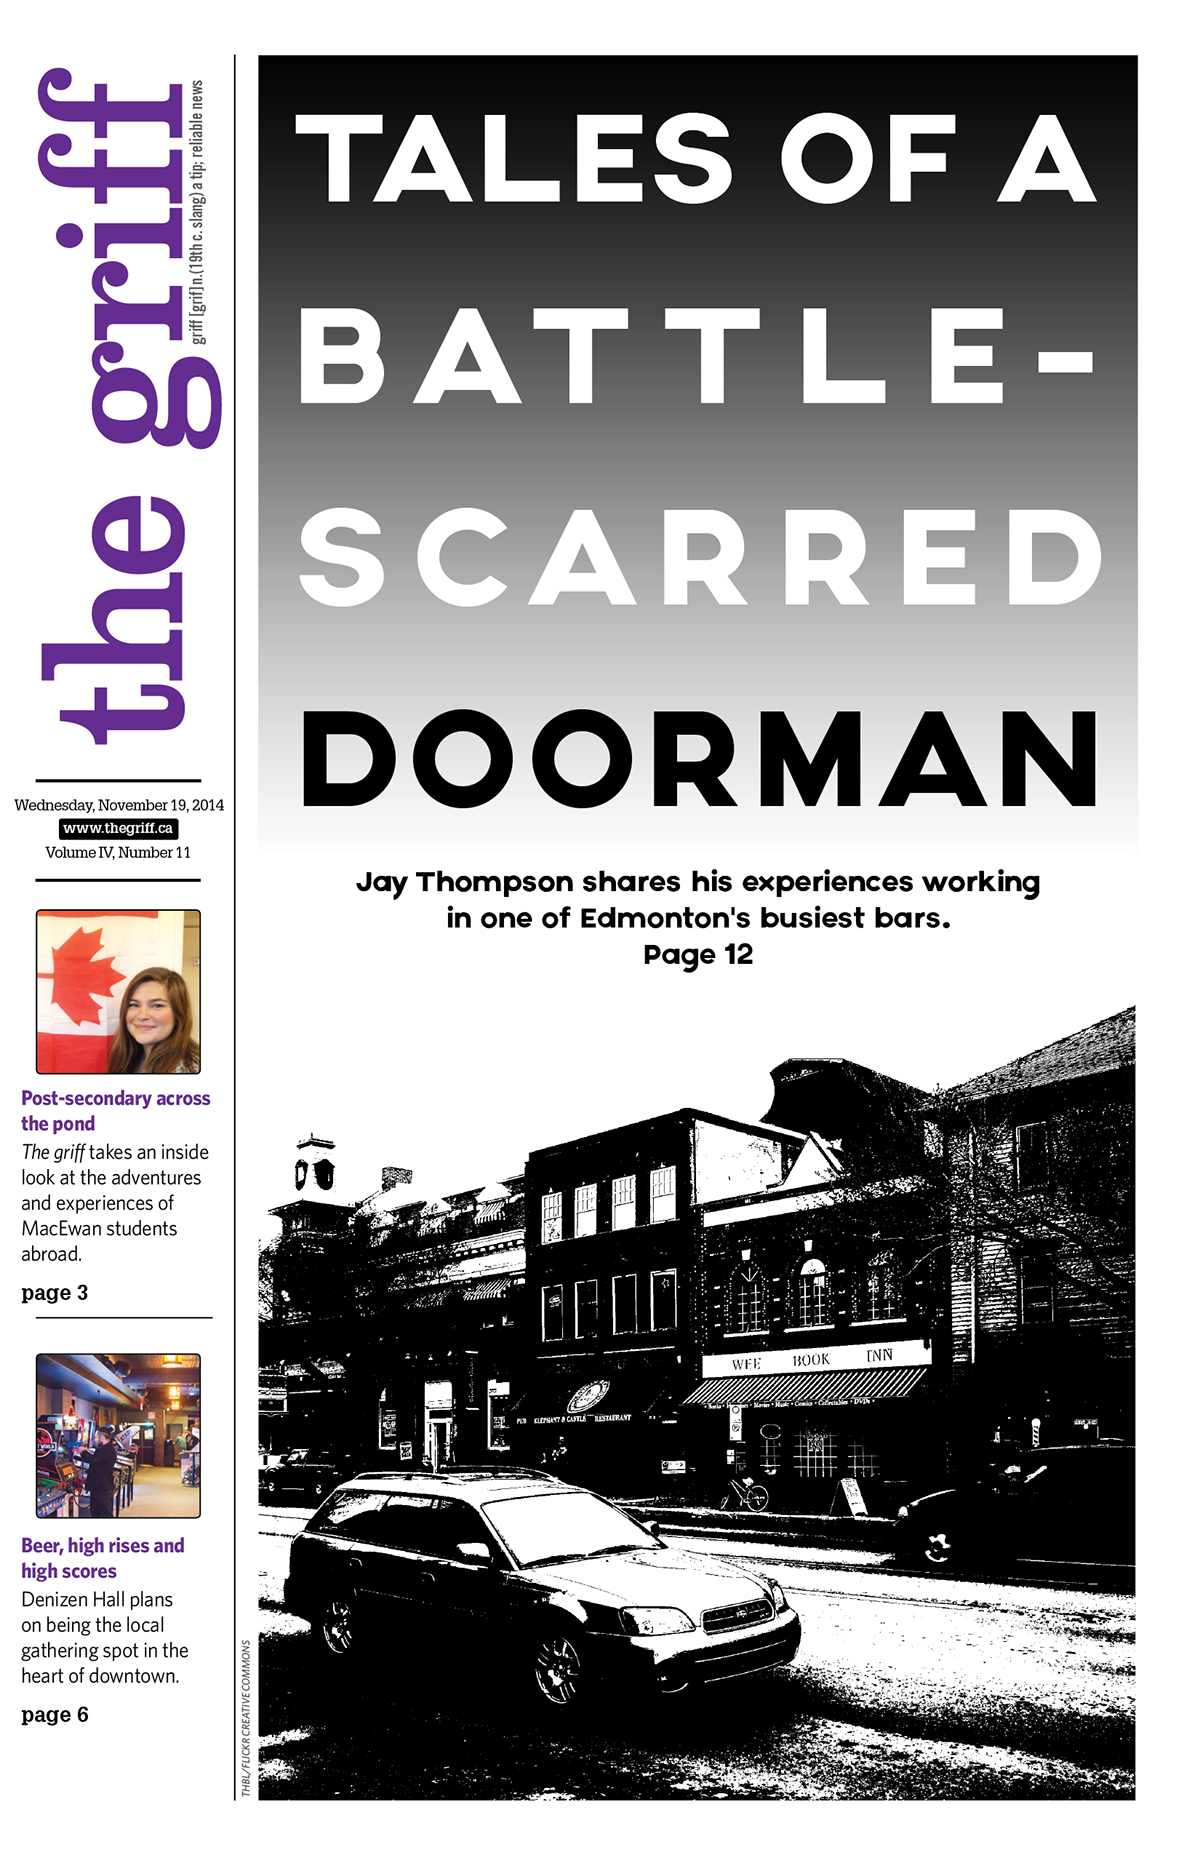 yeg whyte ave The Black Dog bar feature profile student newspaper